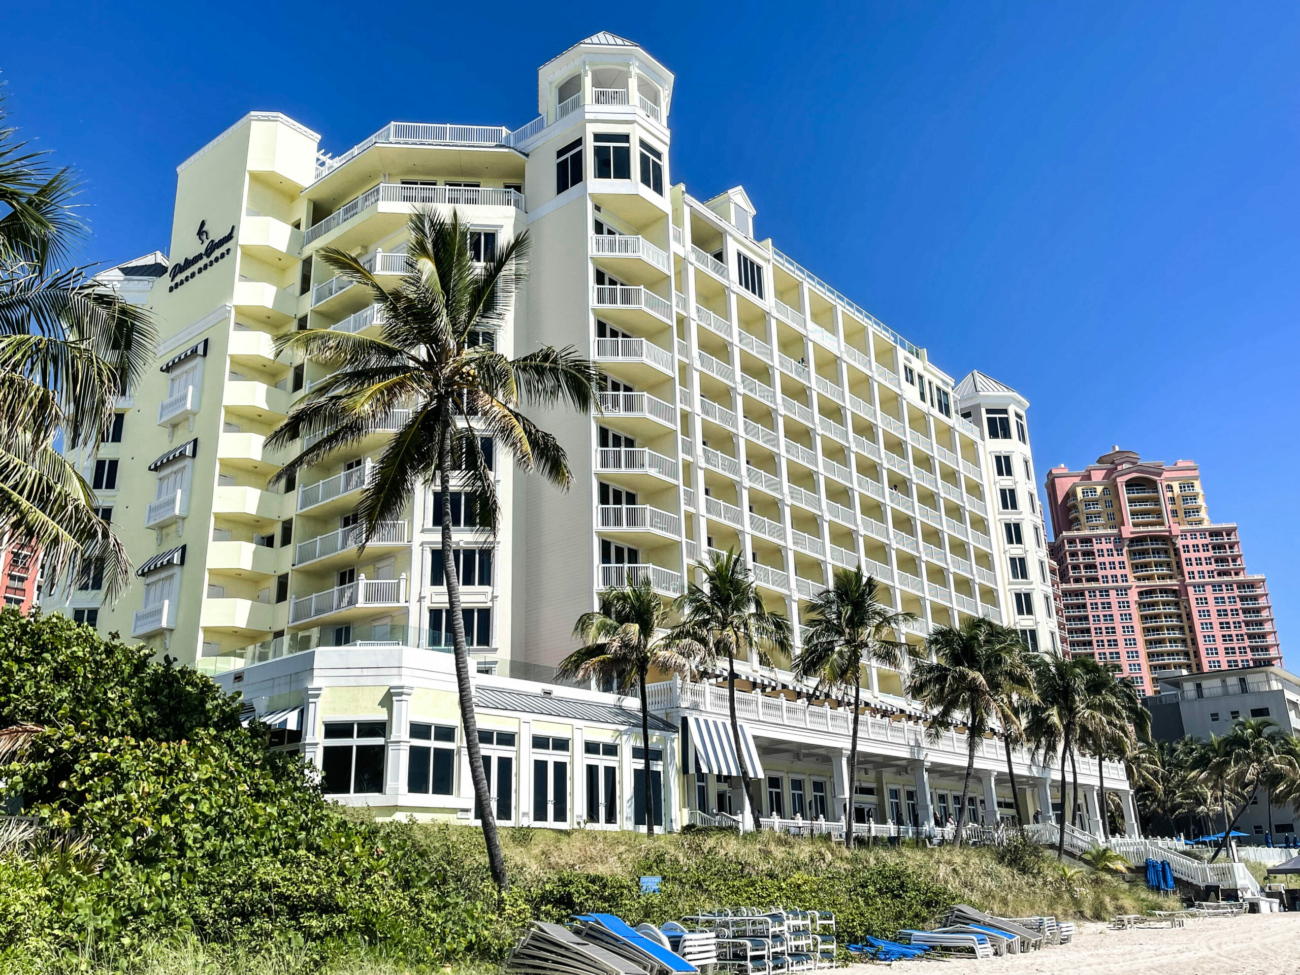 Exterior view of Pelican Grand Beach Resort located in Fort Lauderdale, Florida. Best family resorts in Florida.